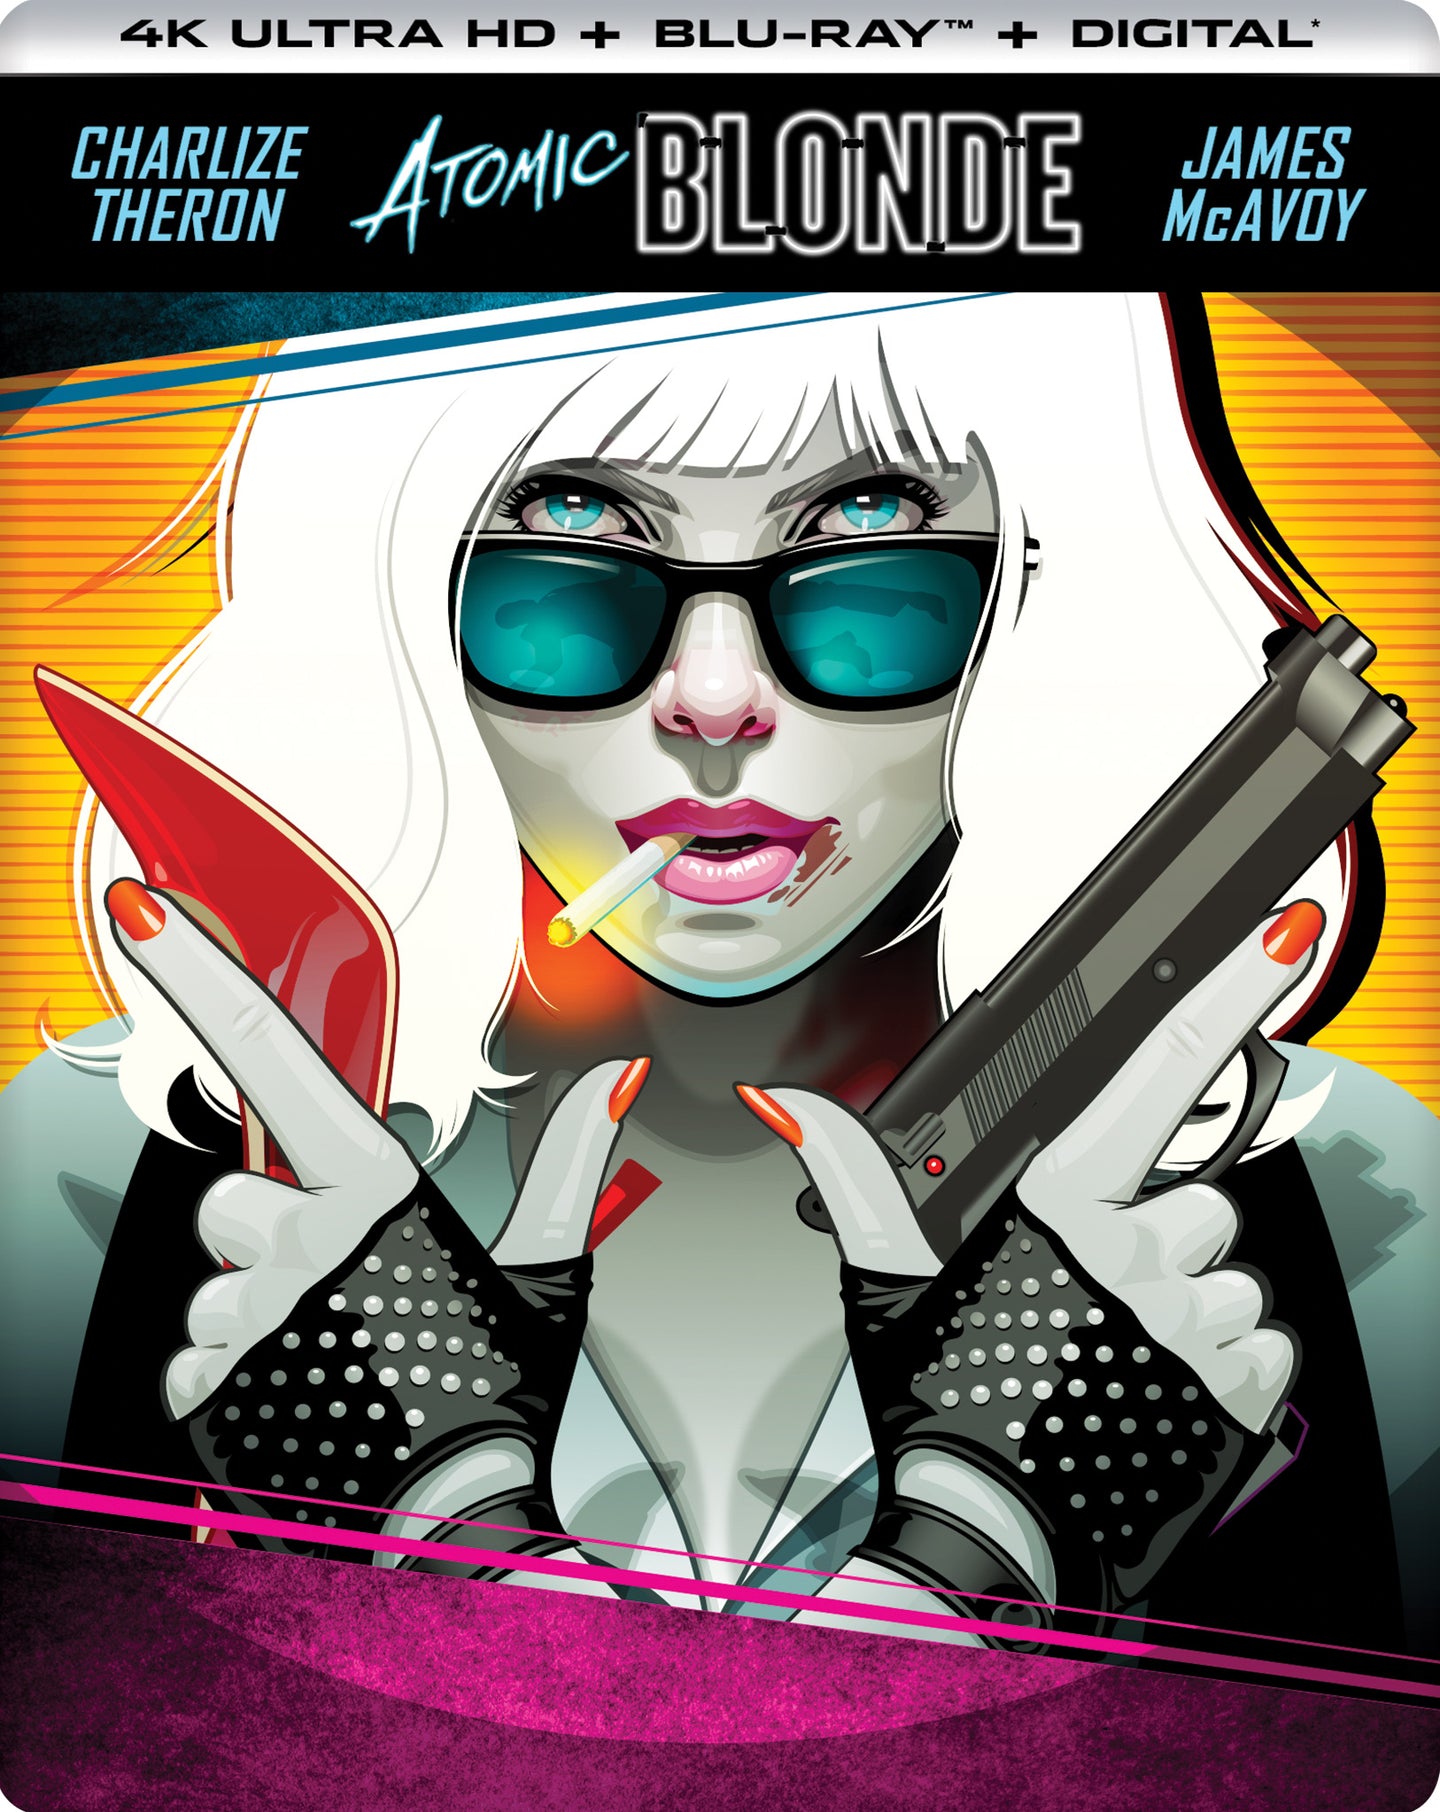 Atomic Blonde (2017: Ports Via MA) iTunes 4K redemption only